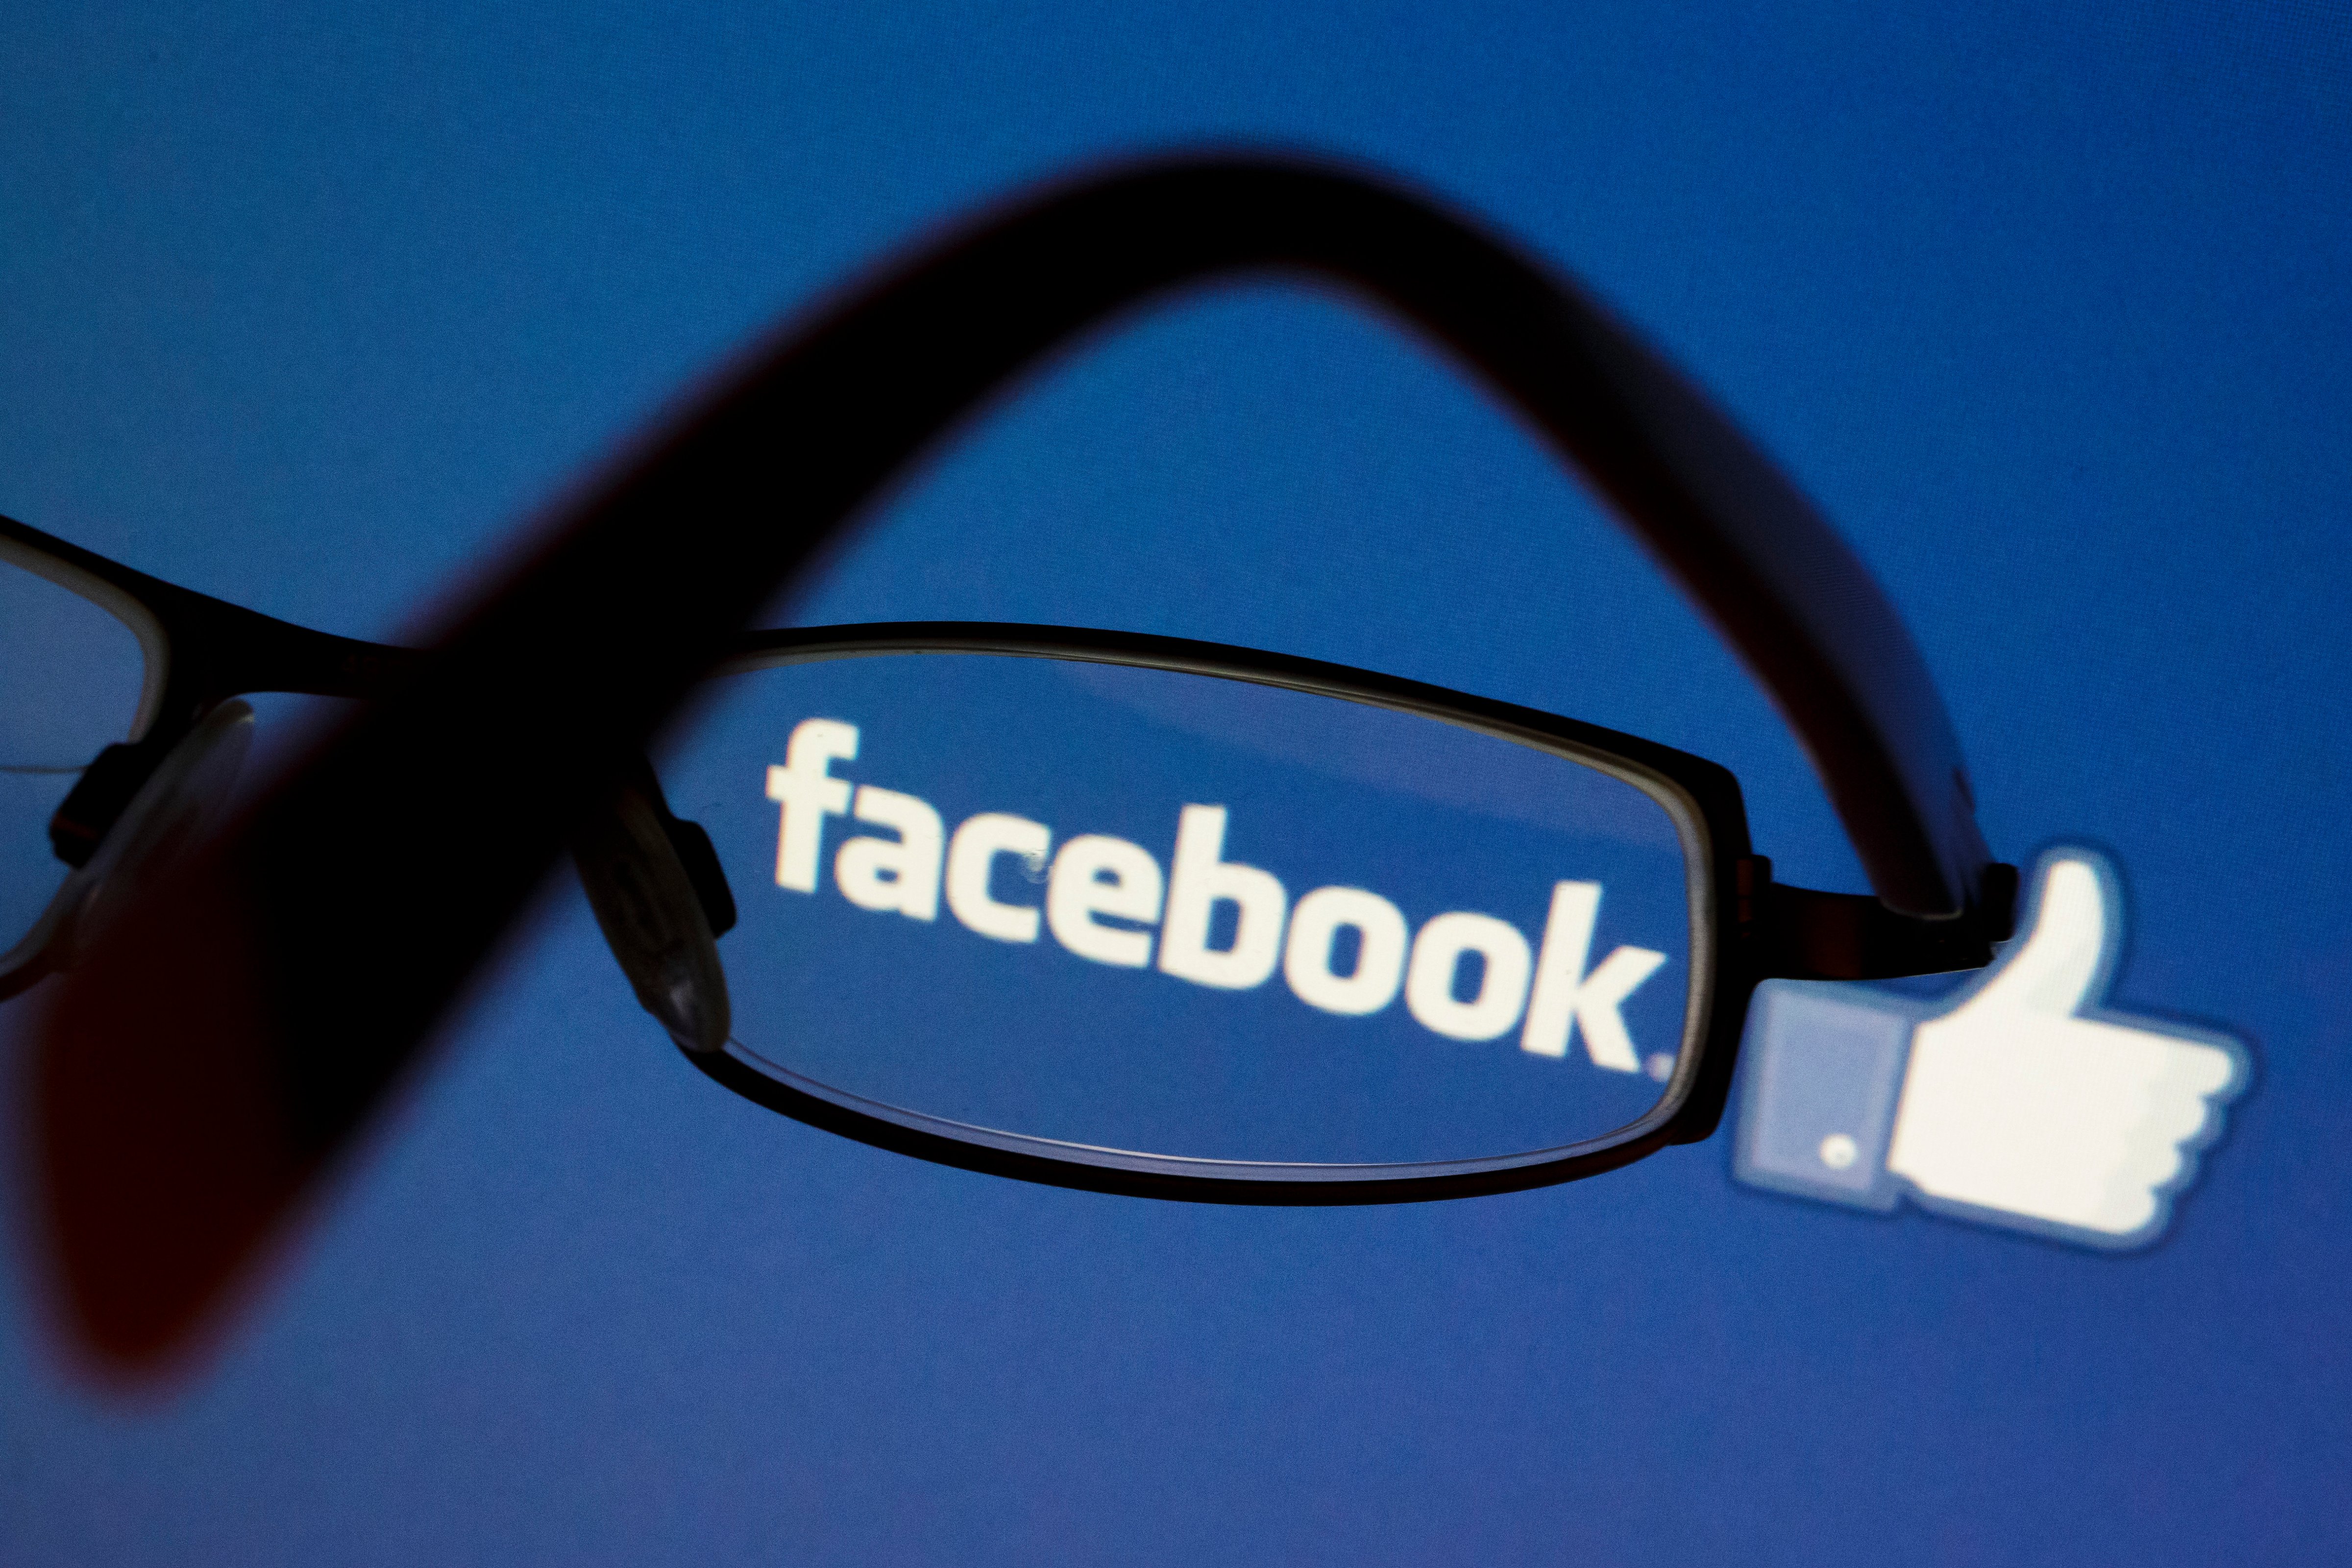 Posed scene on the topic facebook, glasses in front of the facebook logo on September 03, 2015 in Berlin, Germany. (Thomas Trutschel—Photothek/Getty Images)